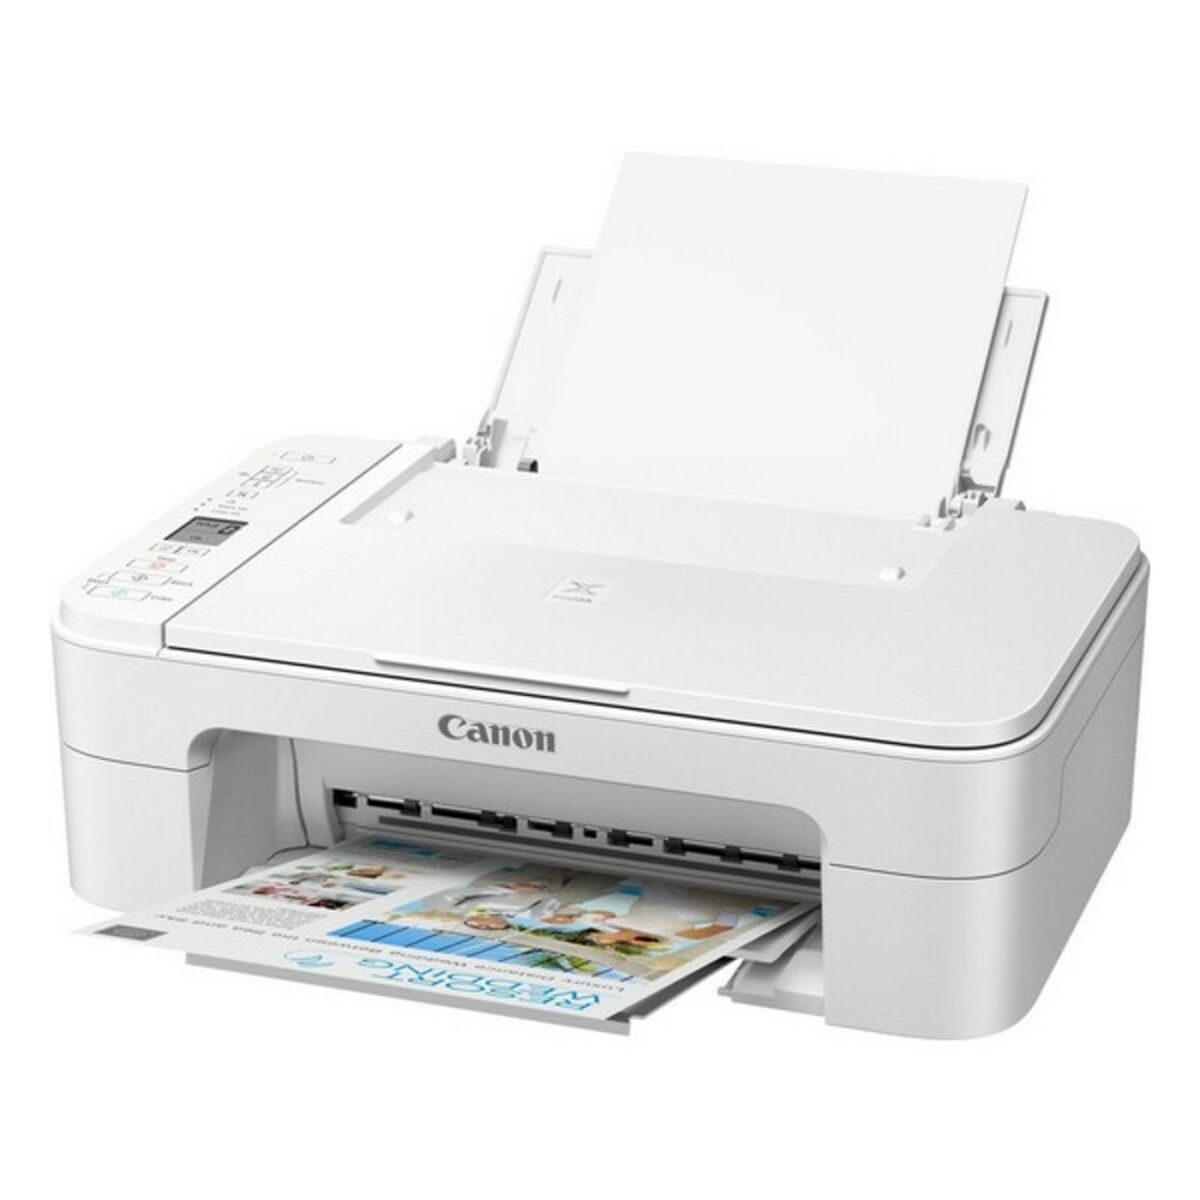 Imprimante Multifonction Canon 3771C026 7 ipm WiFi LCD